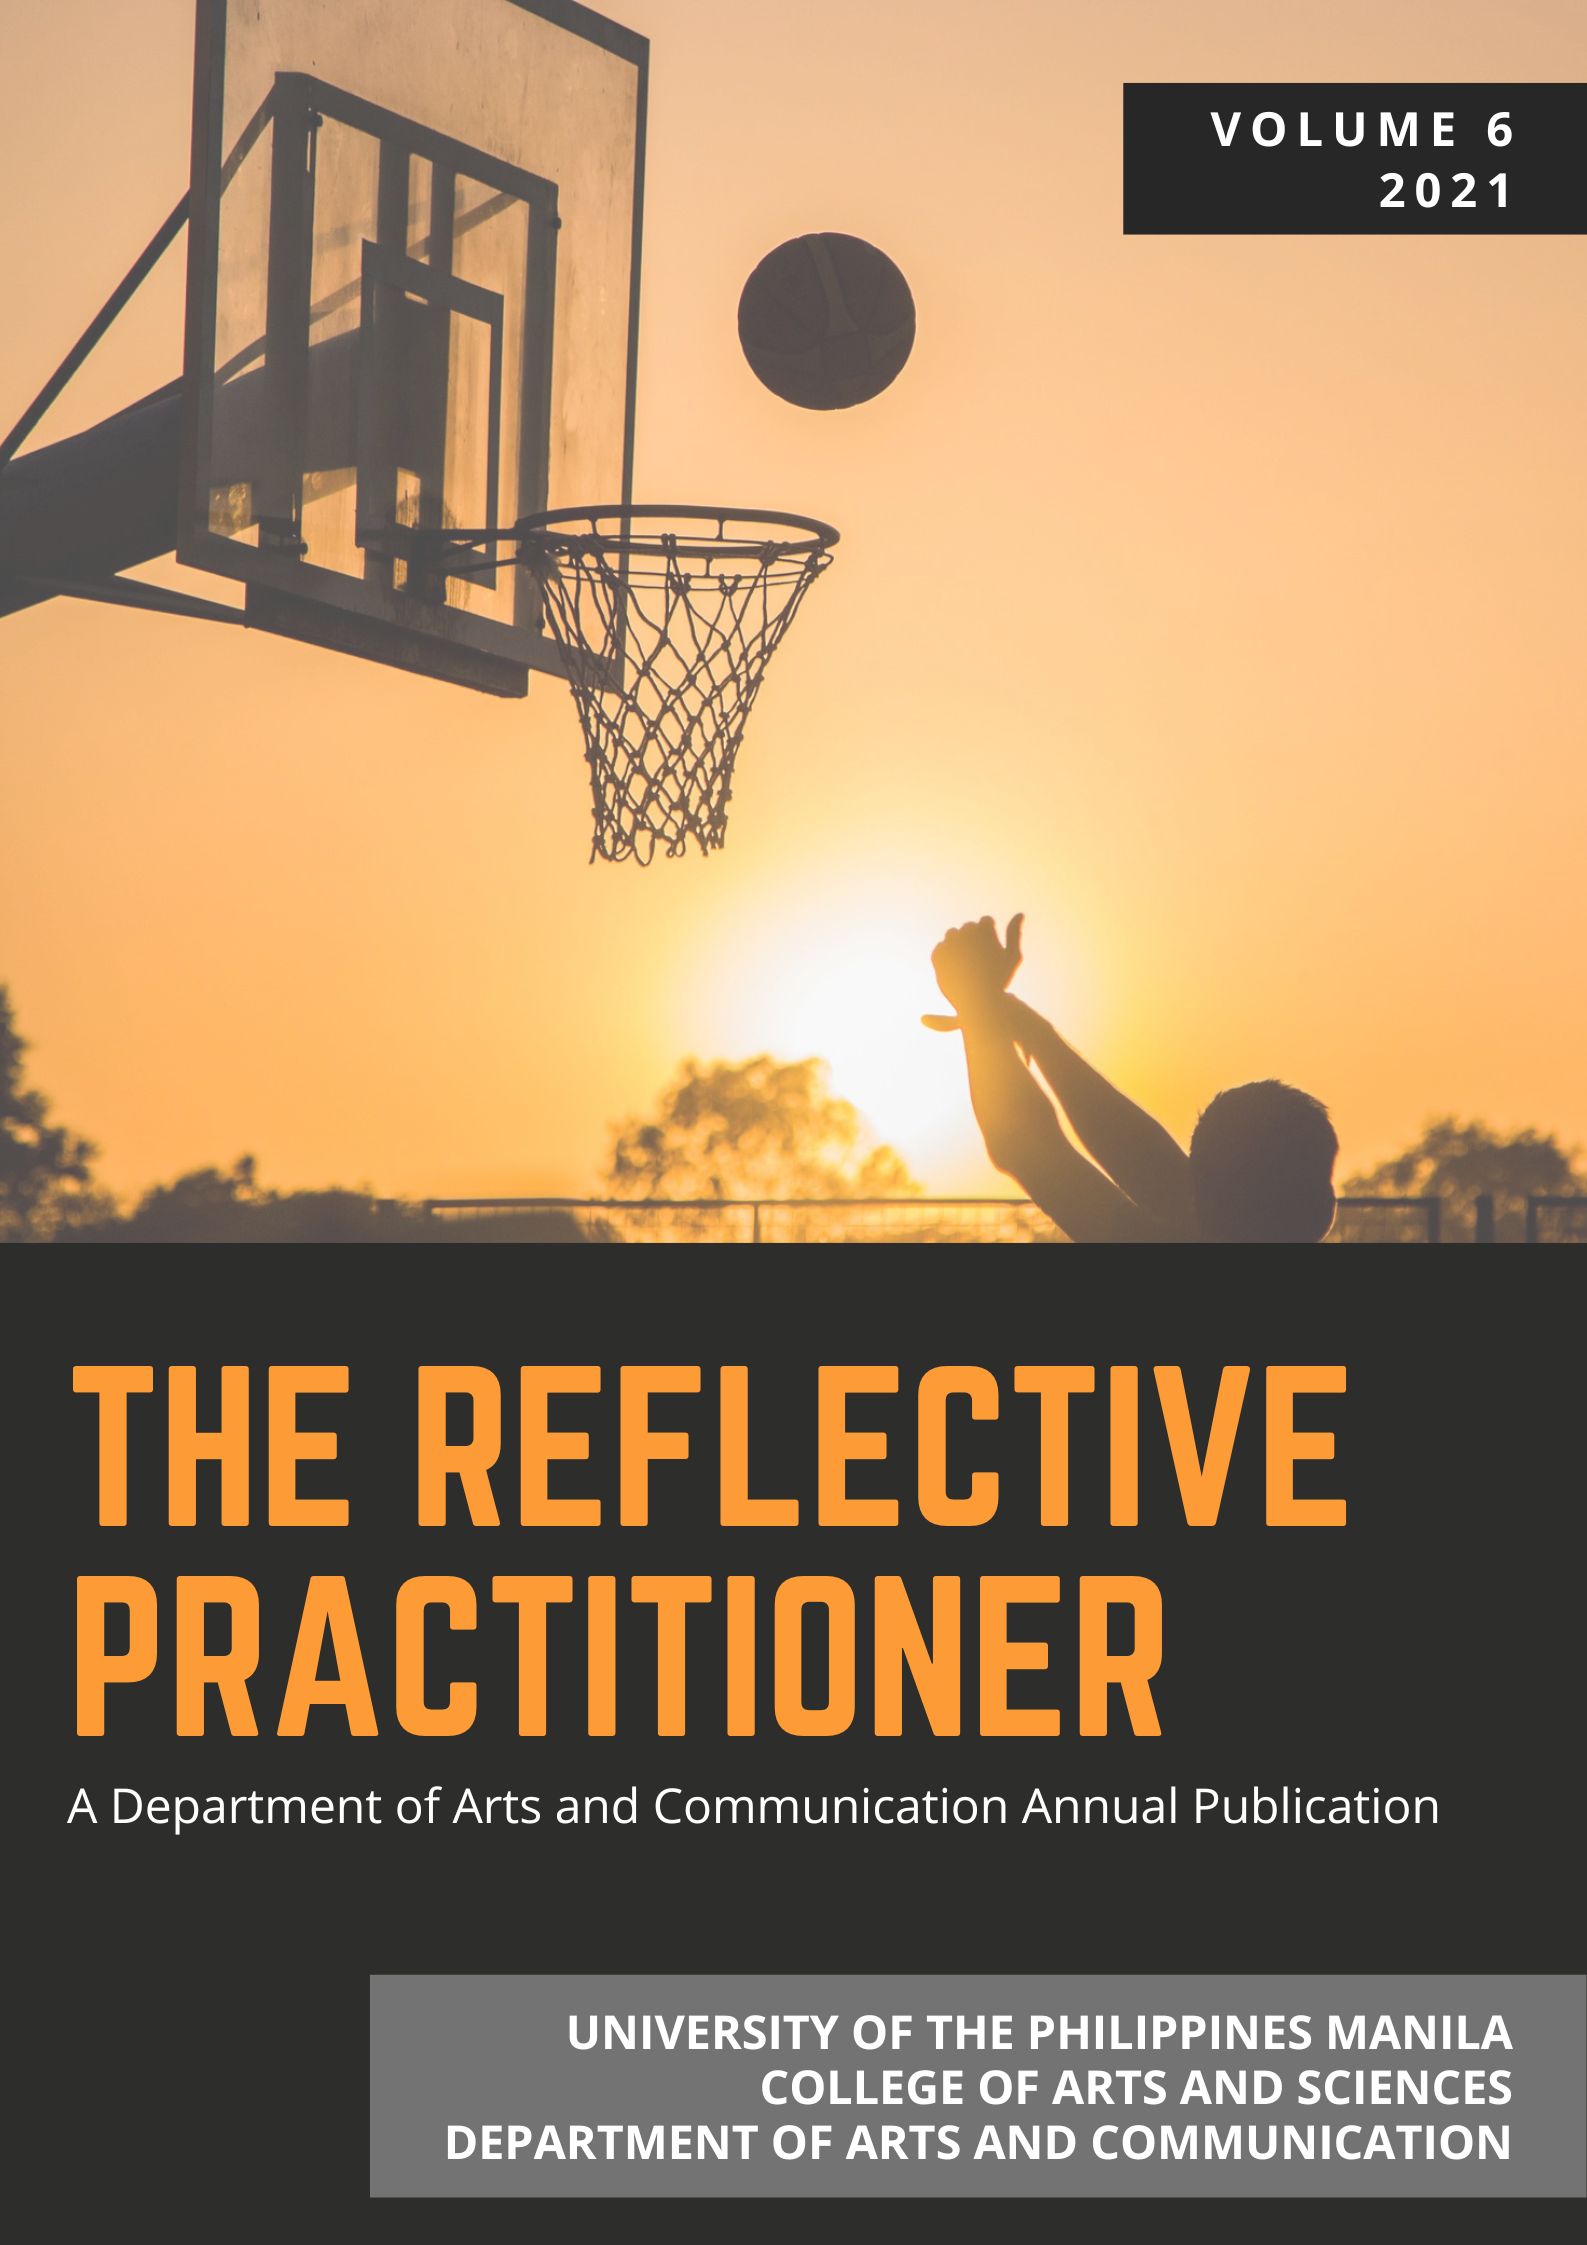 					View Vol. 6 (2021): The Reflective Practitioner
				